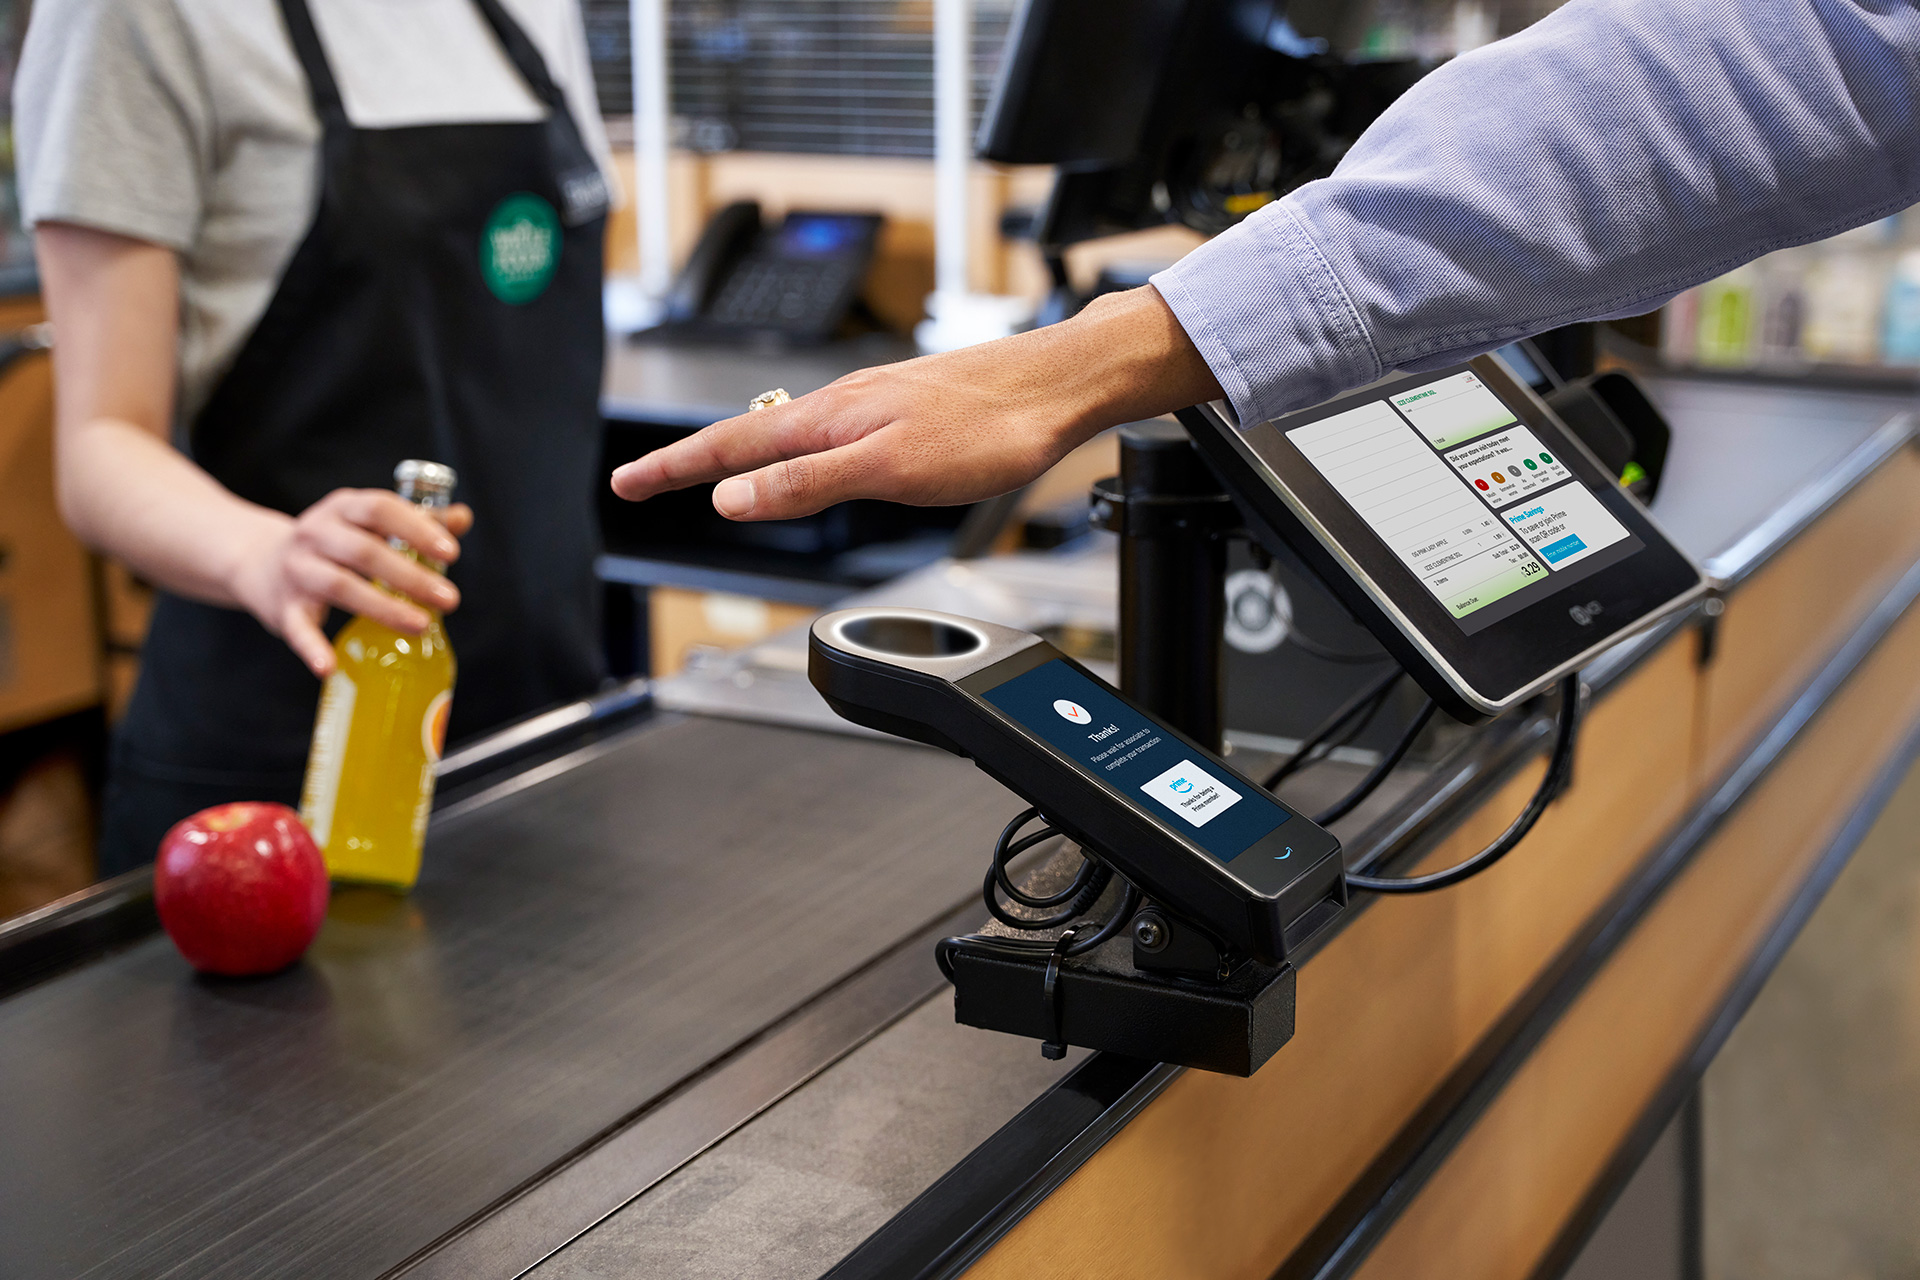 Amazon's palm payments arrive in more than 65 Whole Foods stores in California